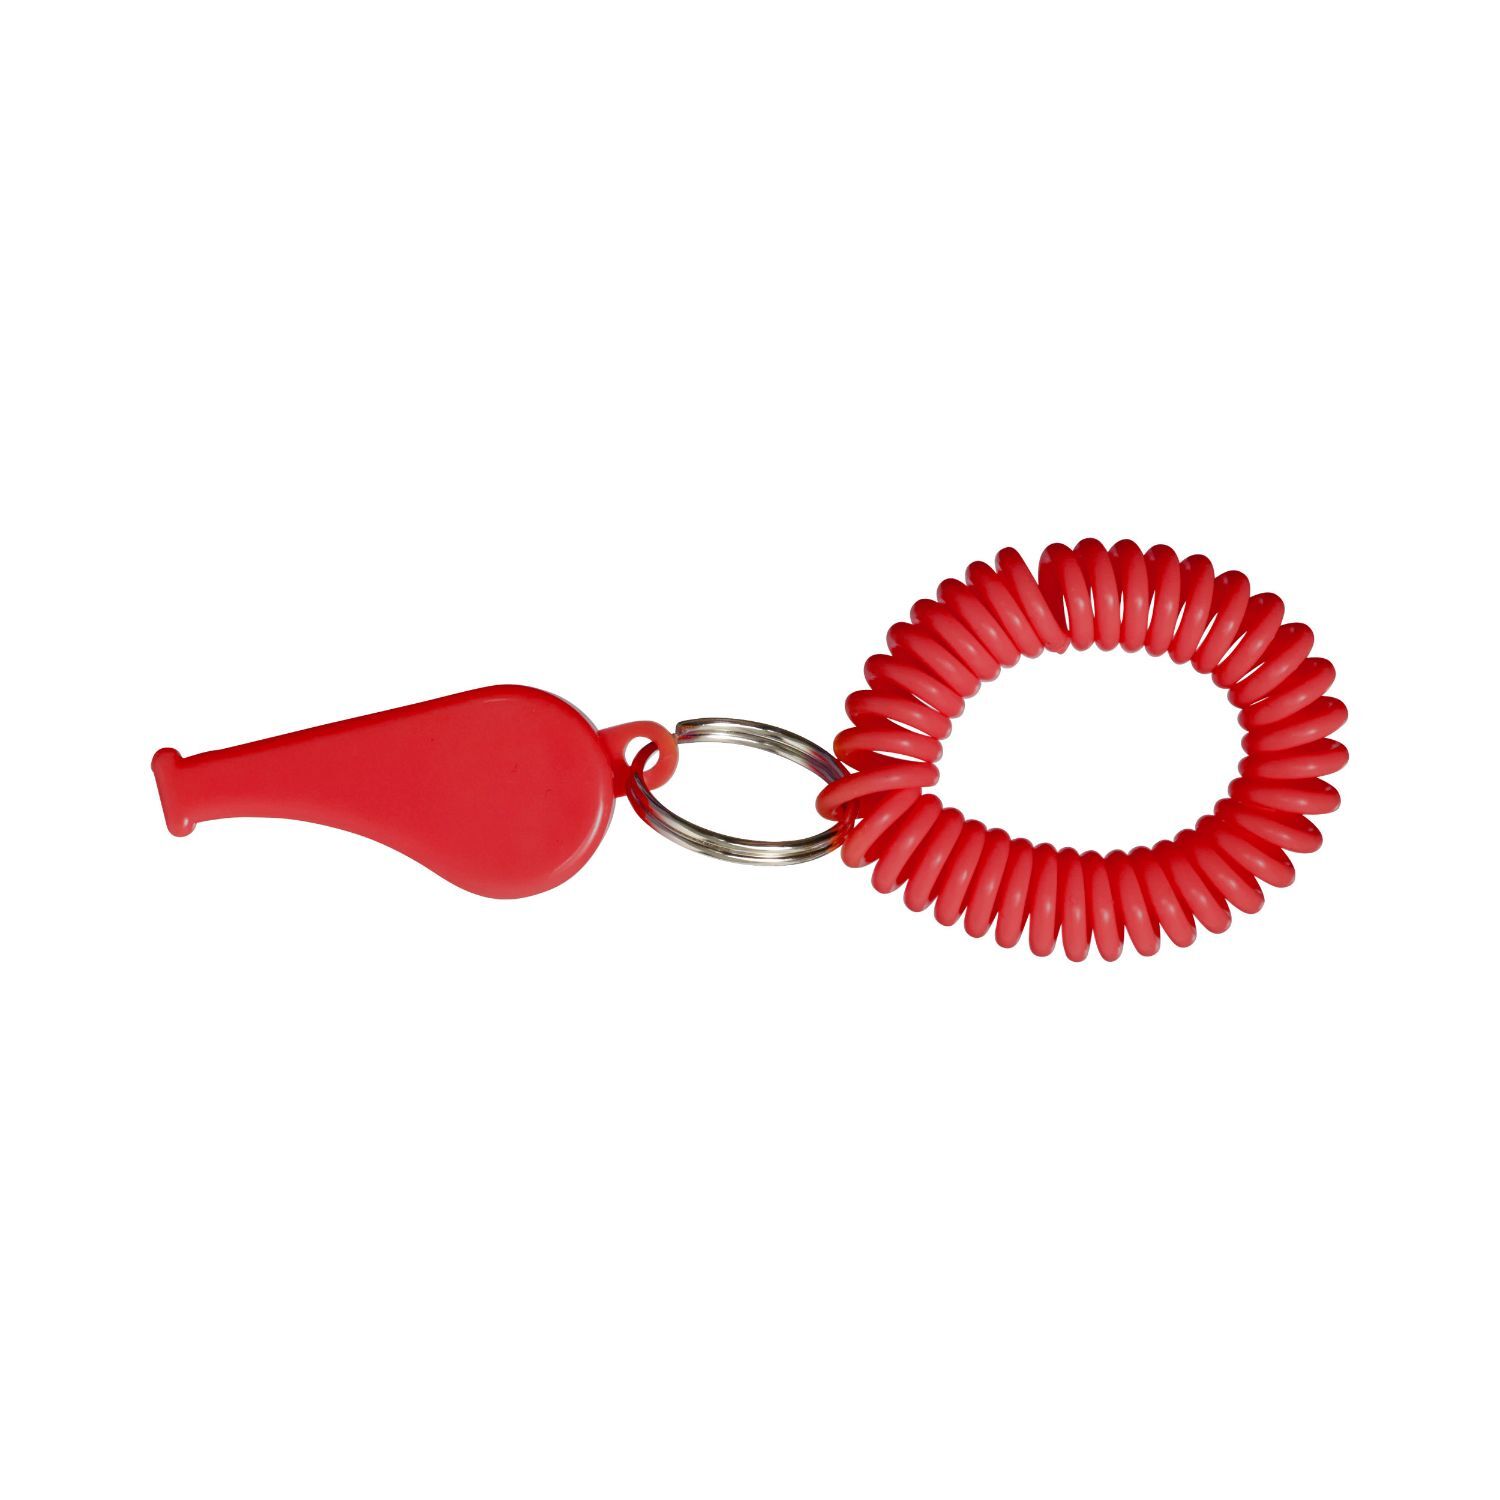 Whistle with Spiral Wrist Cord Red